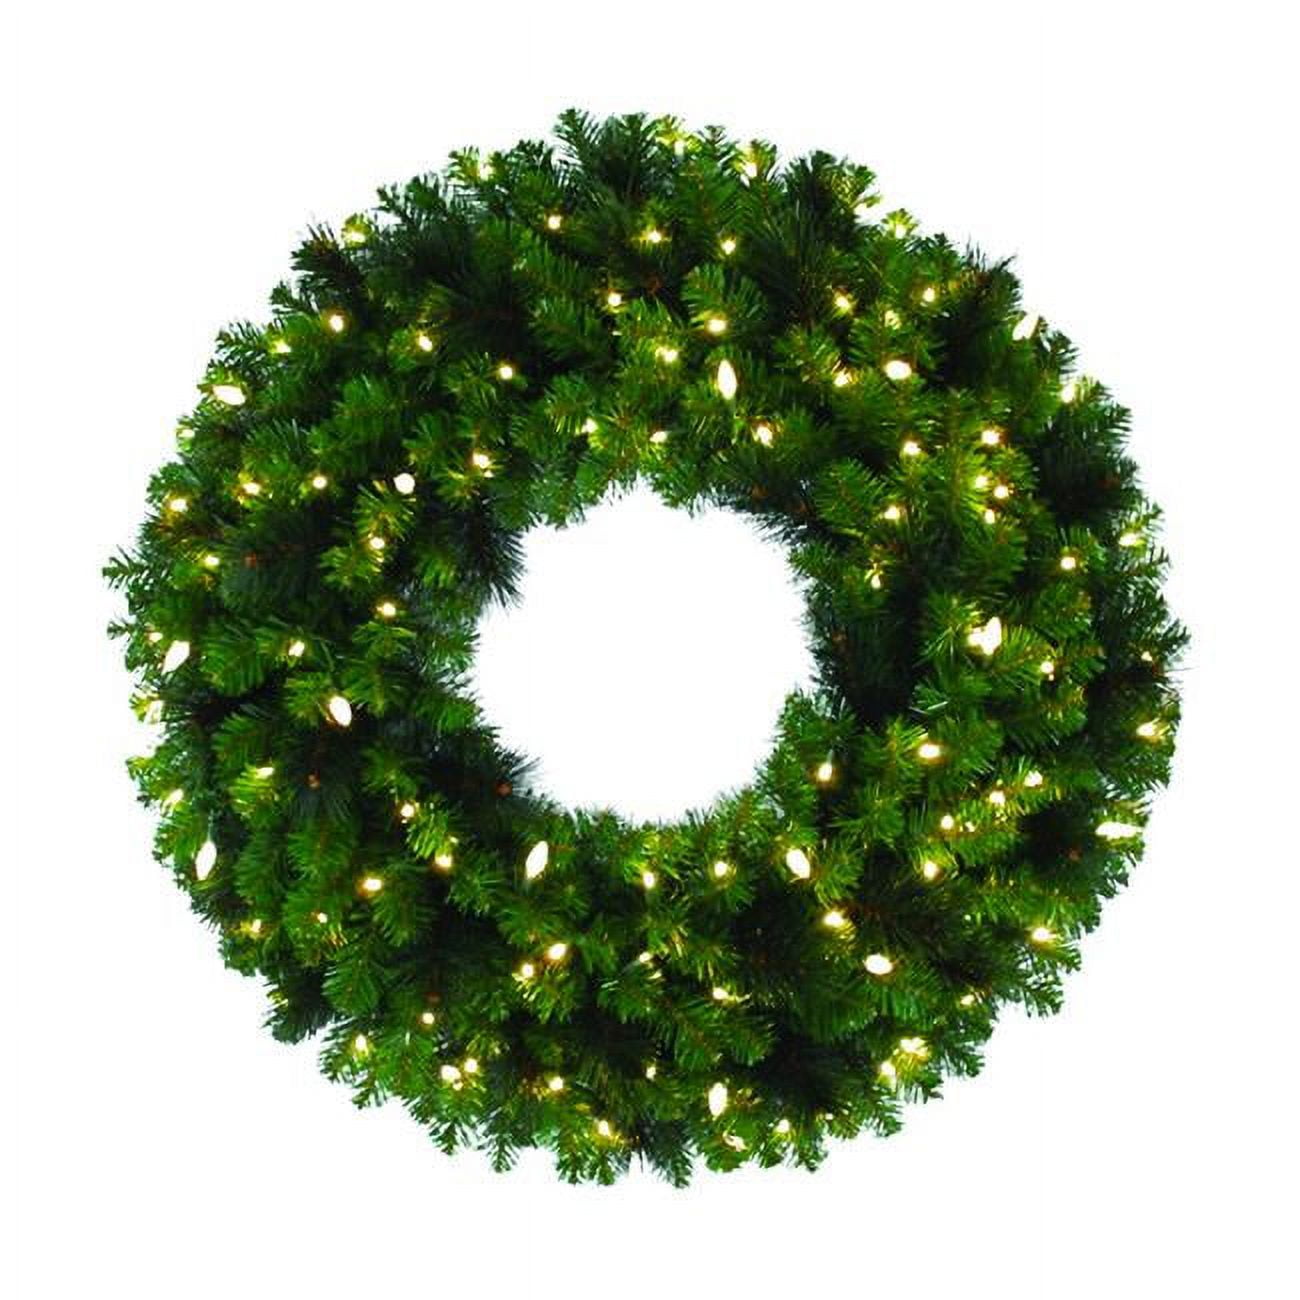 9016959 36 In. Dia. Mixed Pine Prelit Led Decorated Wreath, Warm White - Case Of 2